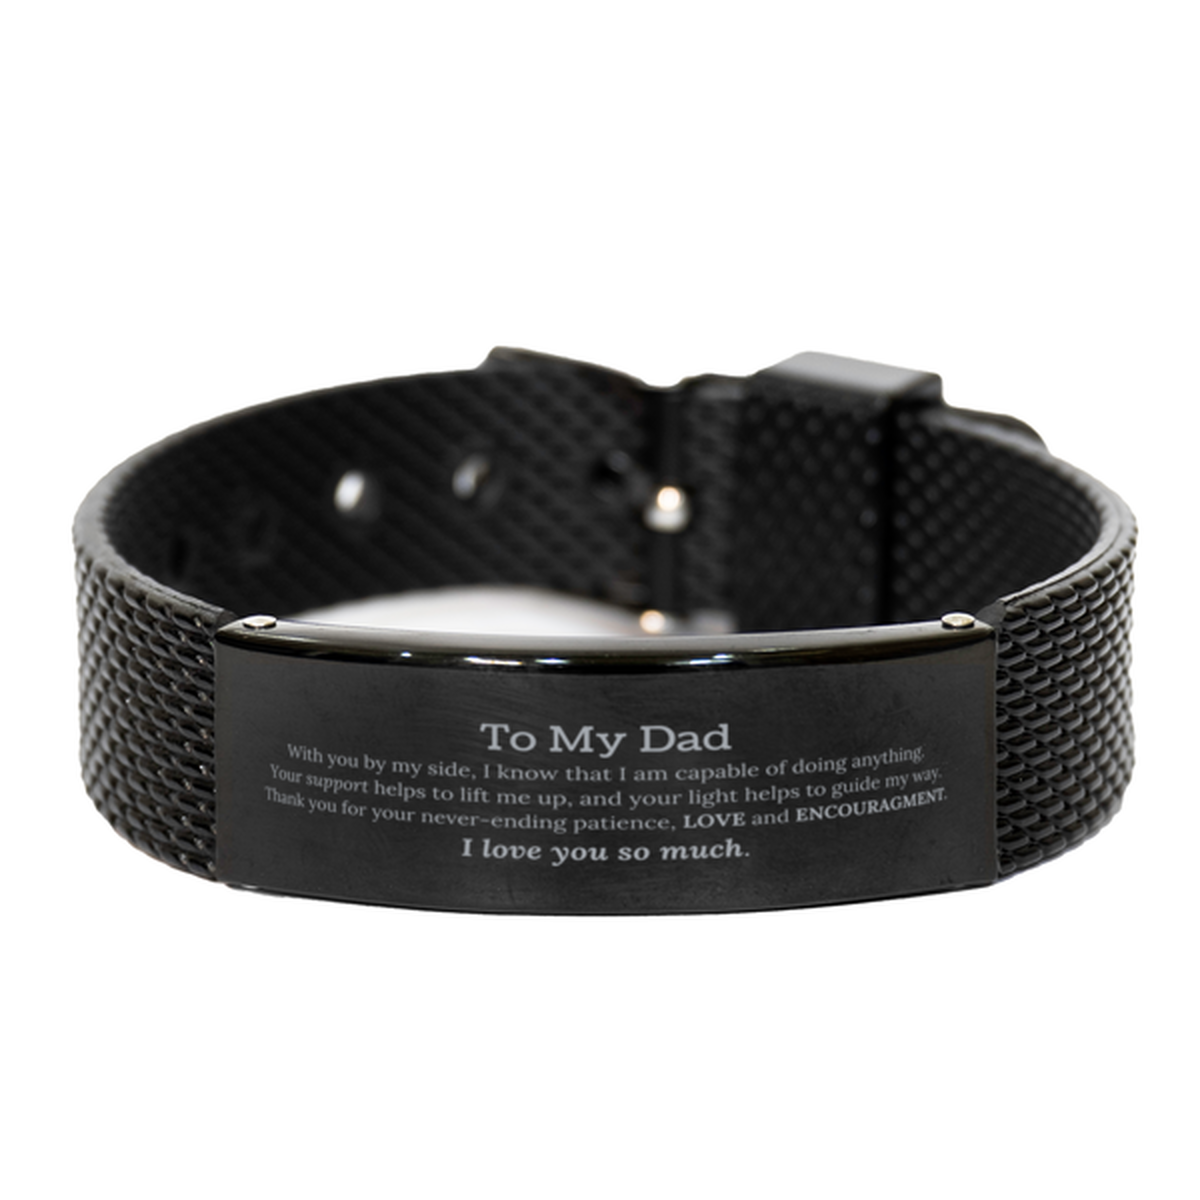 Appreciation Dad Black Shark Mesh Bracelet Gifts, To My Dad Birthday Christmas Wedding Keepsake Gifts for Dad With you by my side, I know that I am capable of doing anything. I love you so much